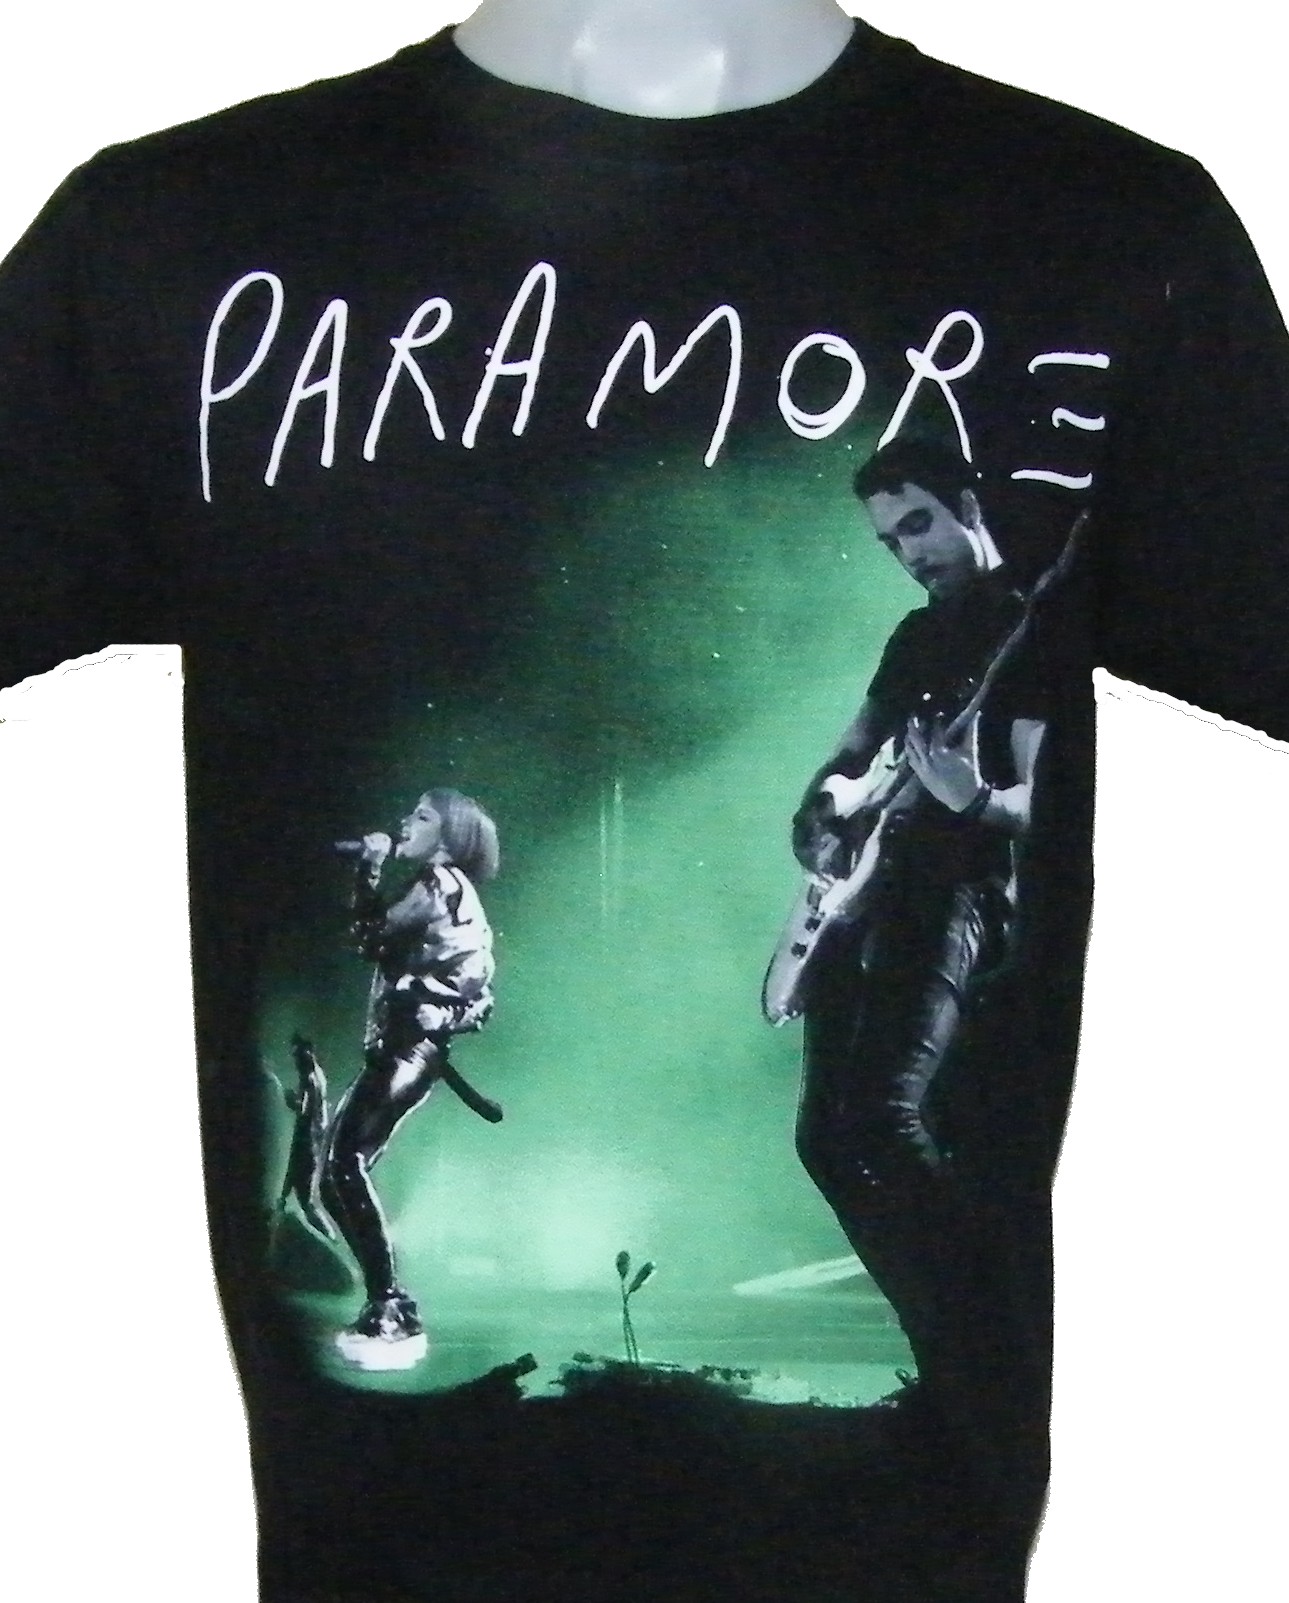 Paramore t-shirt size S